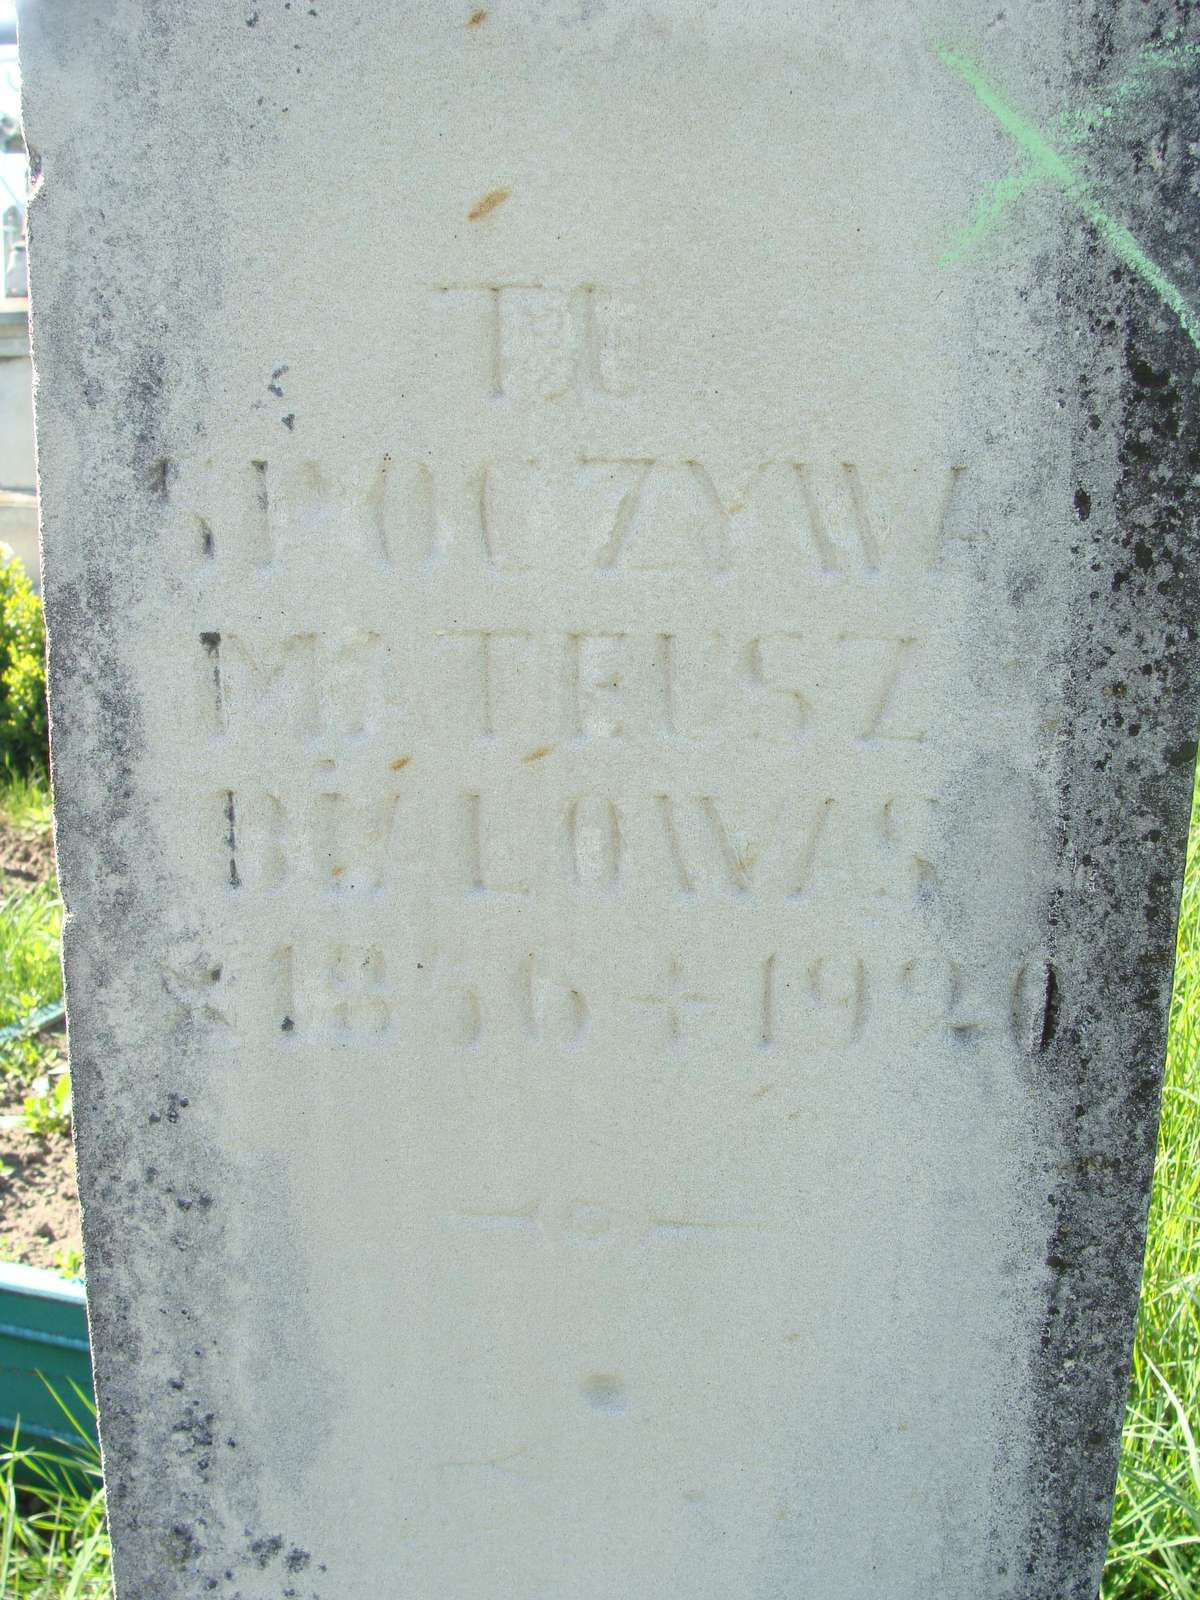 Inscription from the gravestone of Mateusz Białowąs, cemetery in Ihrownica